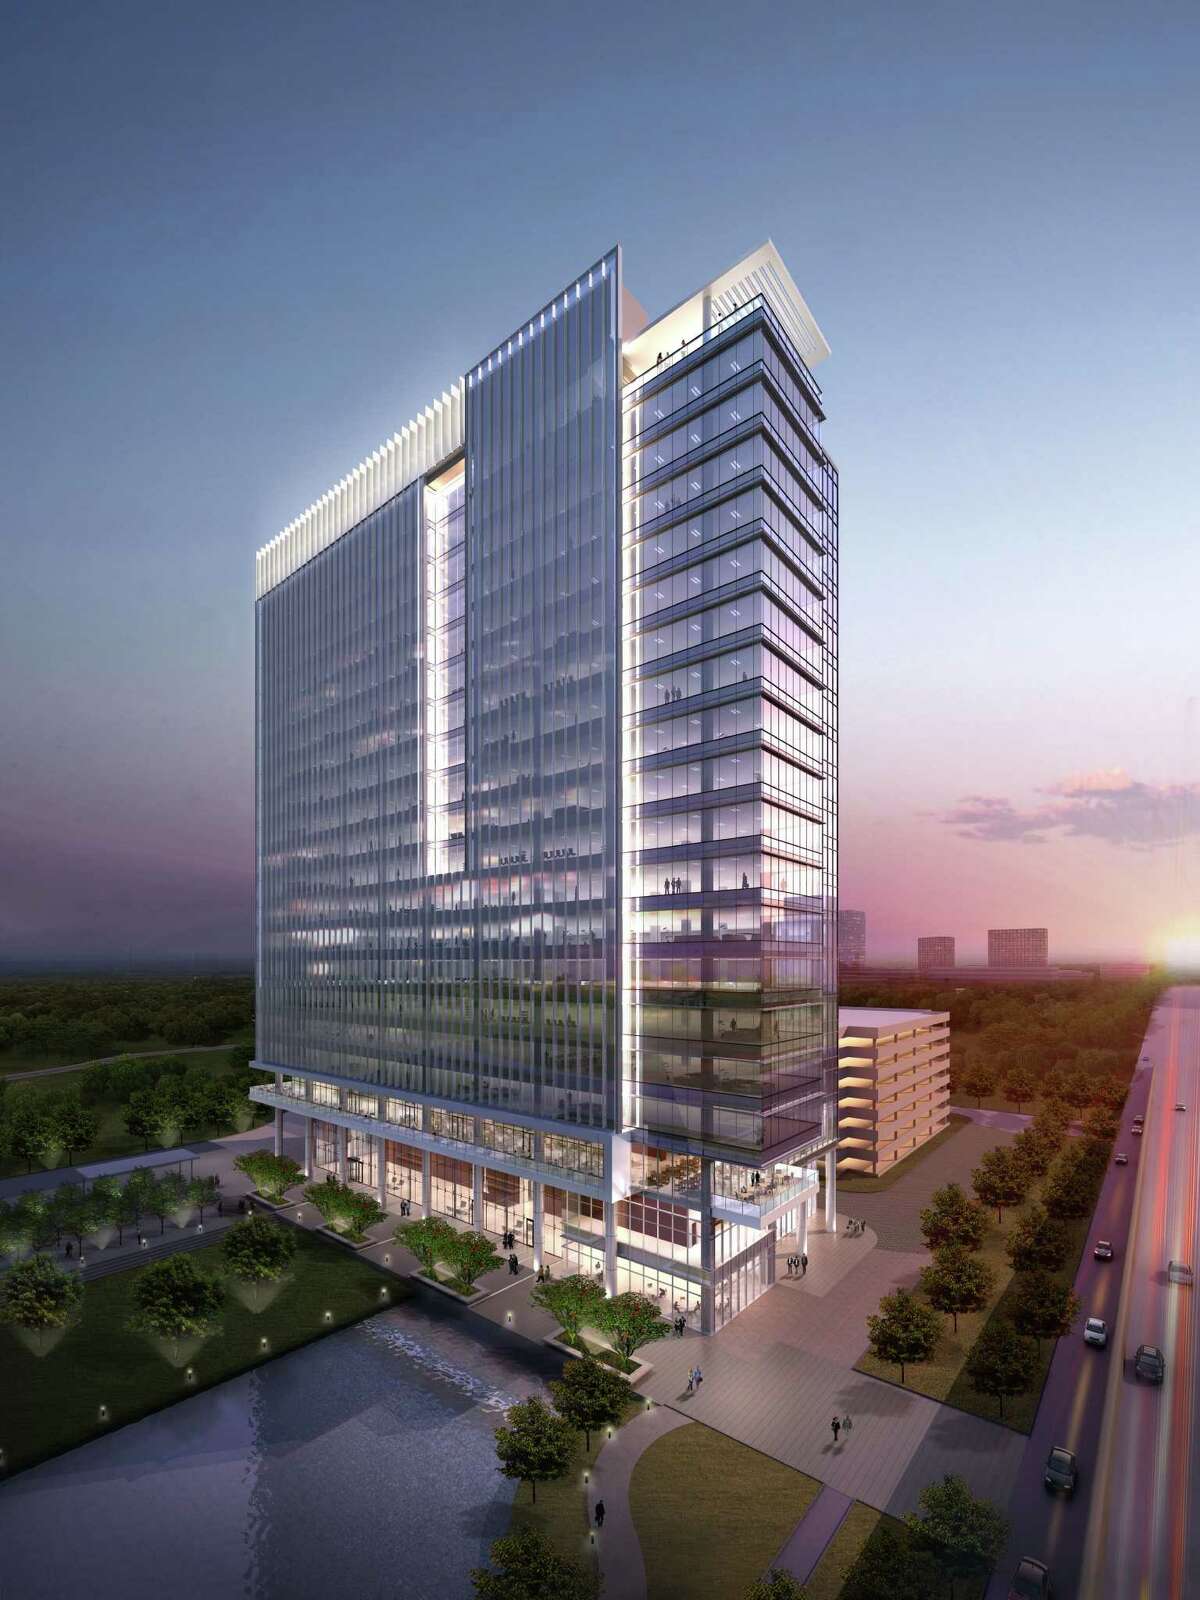 Trammell Crow and Principal Real Estate Investors are having this 20-story tower, shown in a rendering, built on a speculative basis.